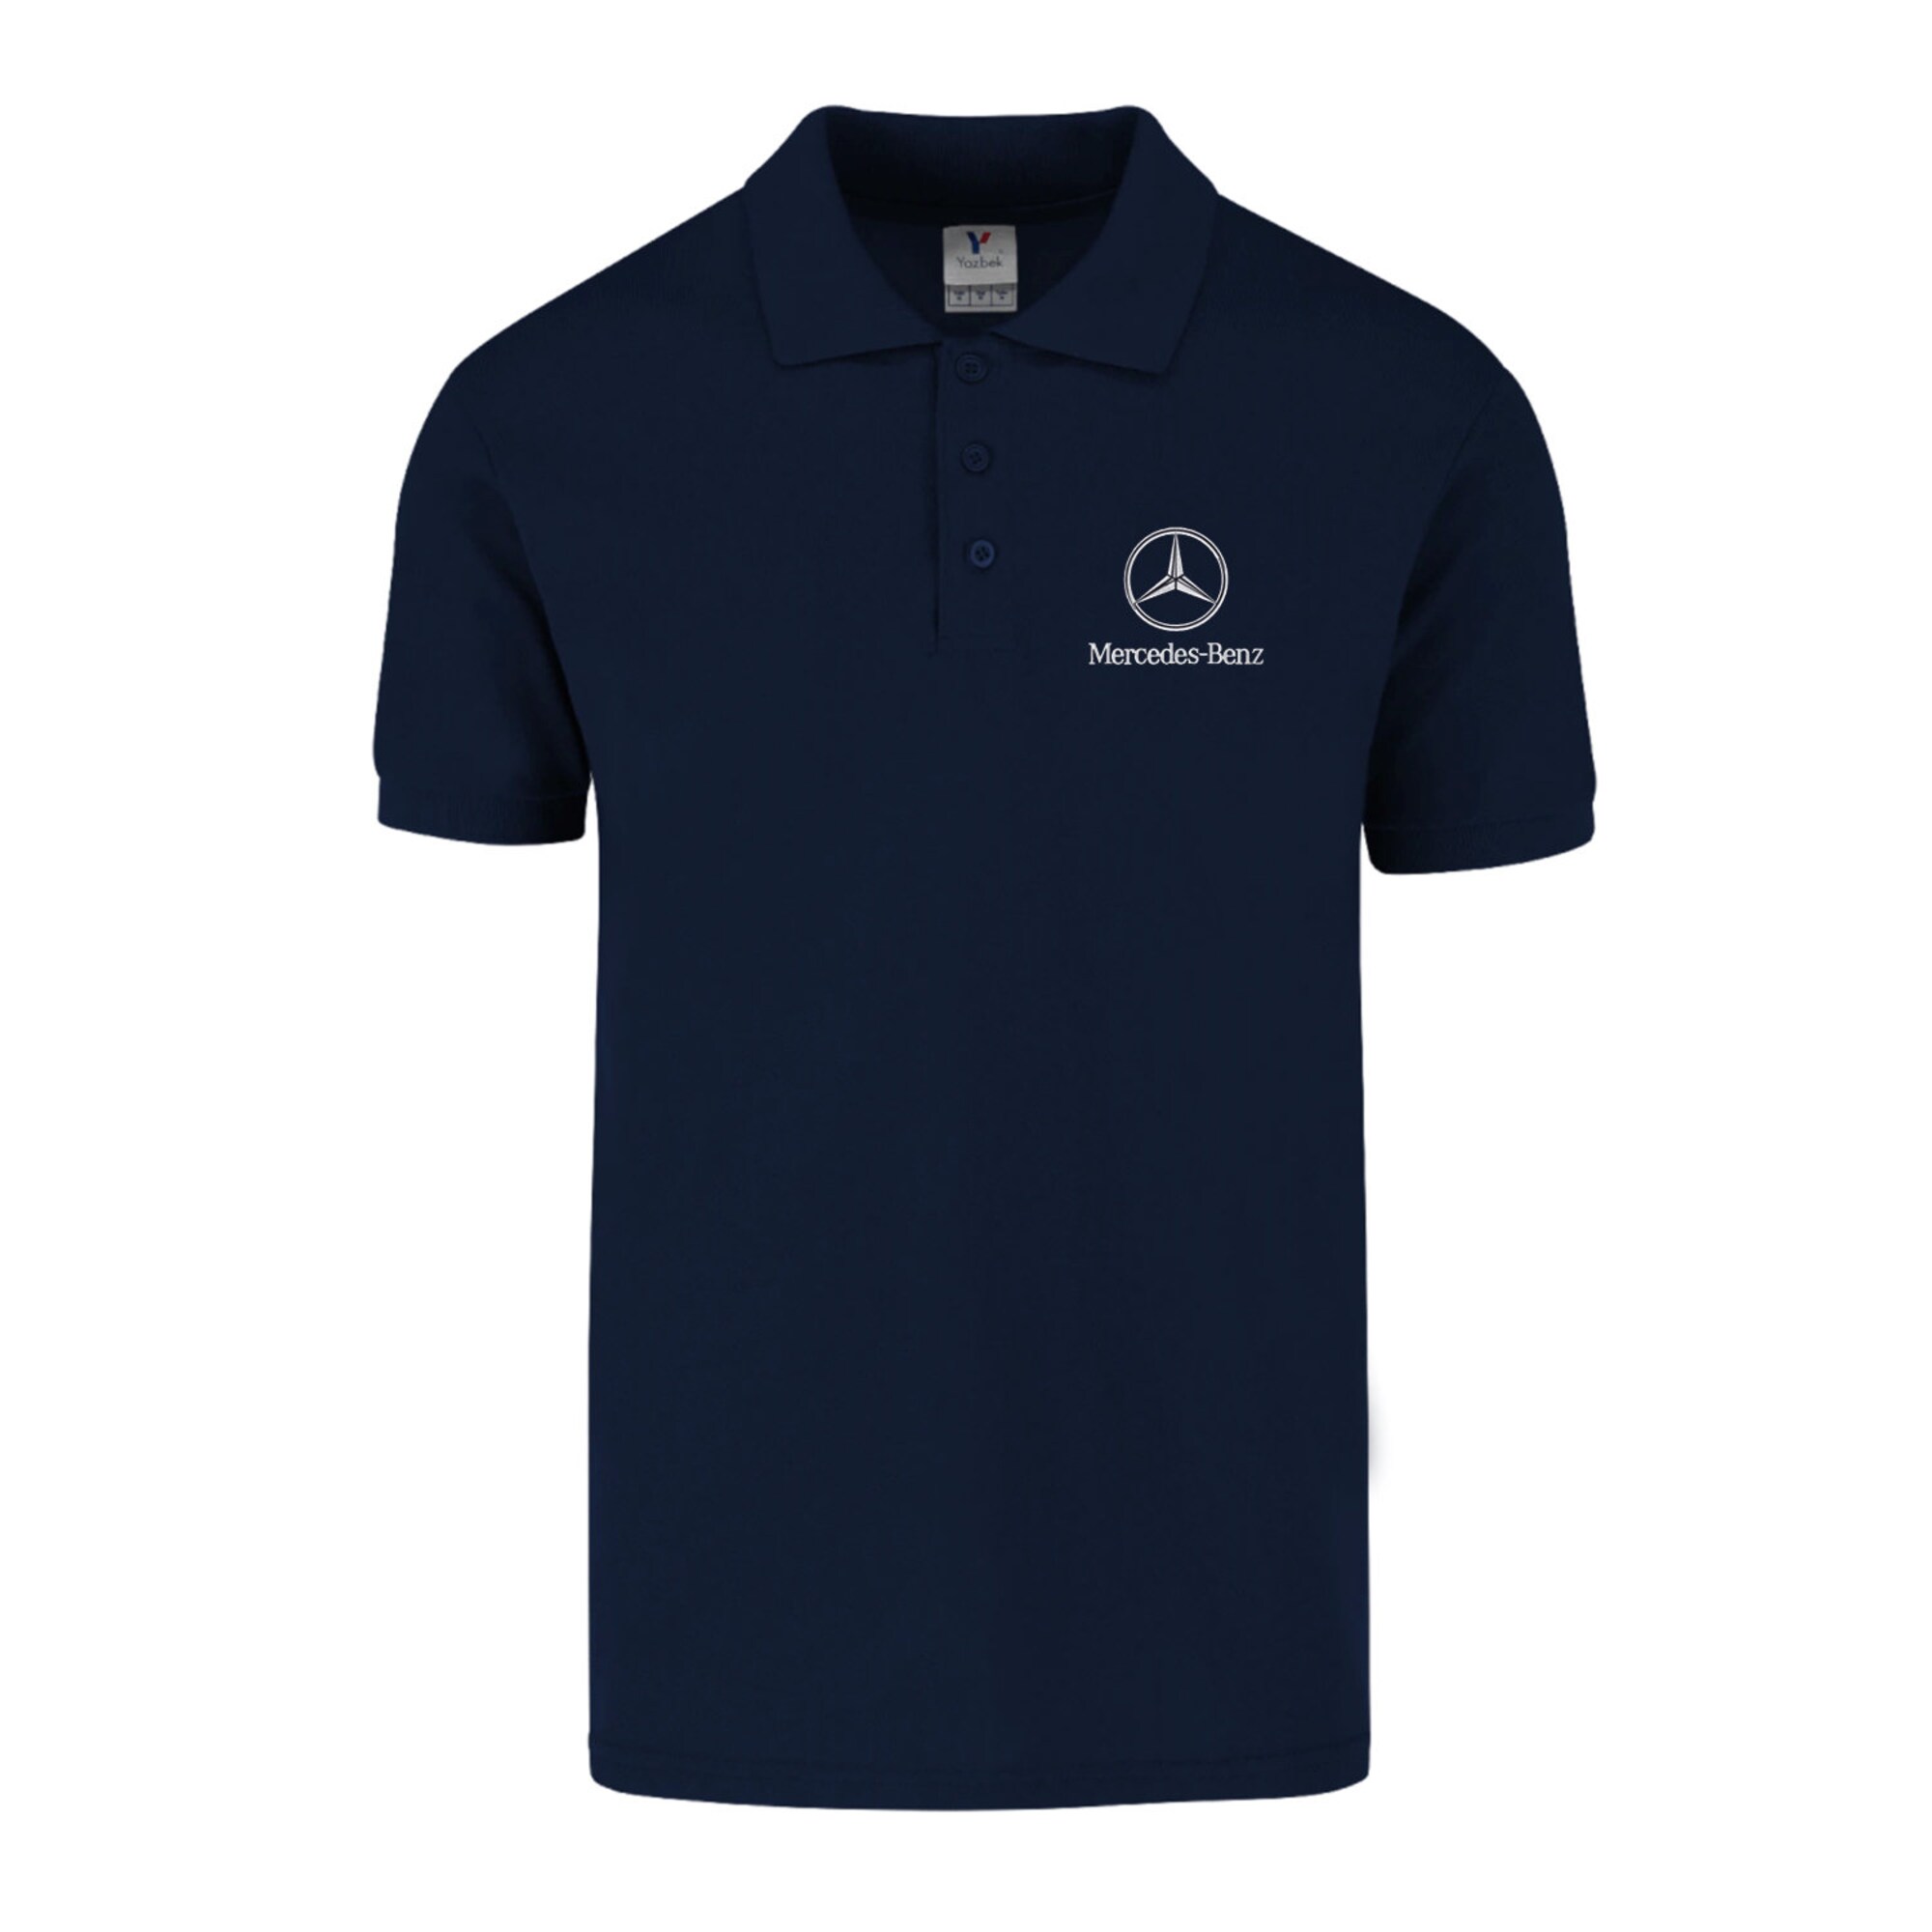 Mercedes Benz Logo Polo Embroidery Shirt Men Fitted Solid Colors Cotton